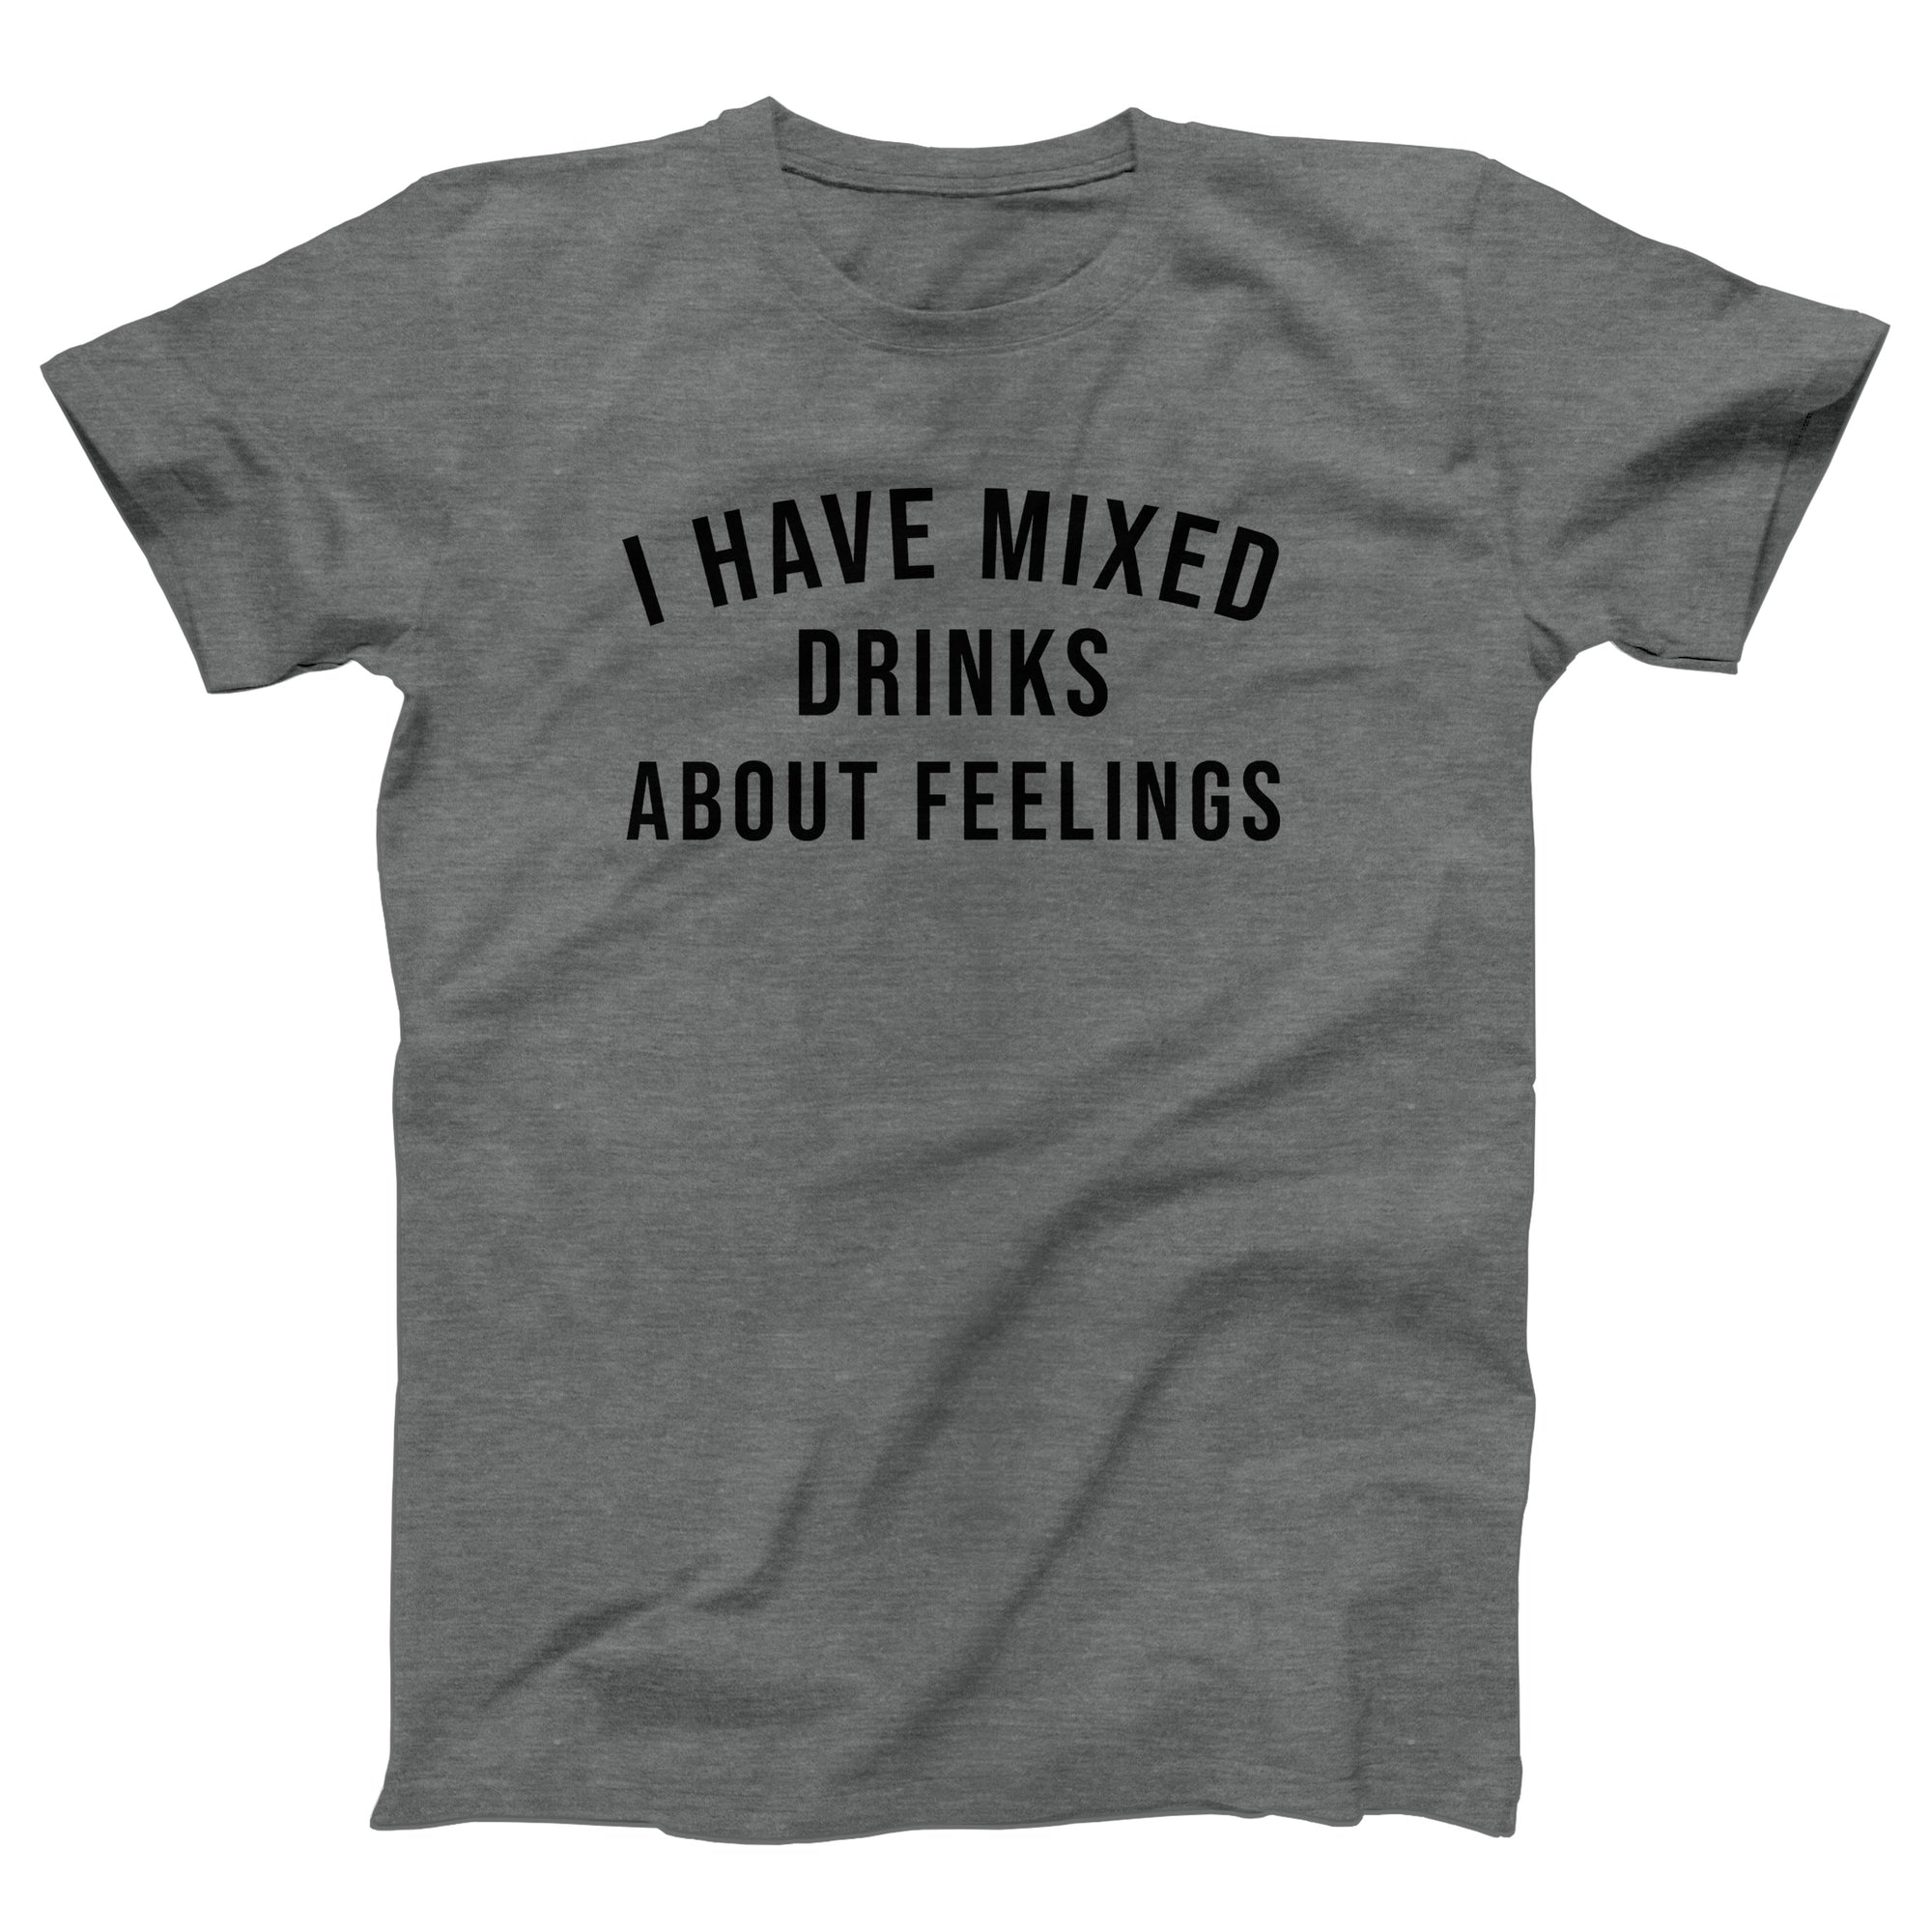 I Have Mixed Drinks About Feelings Adult Unisex T-Shirt - anishphilip